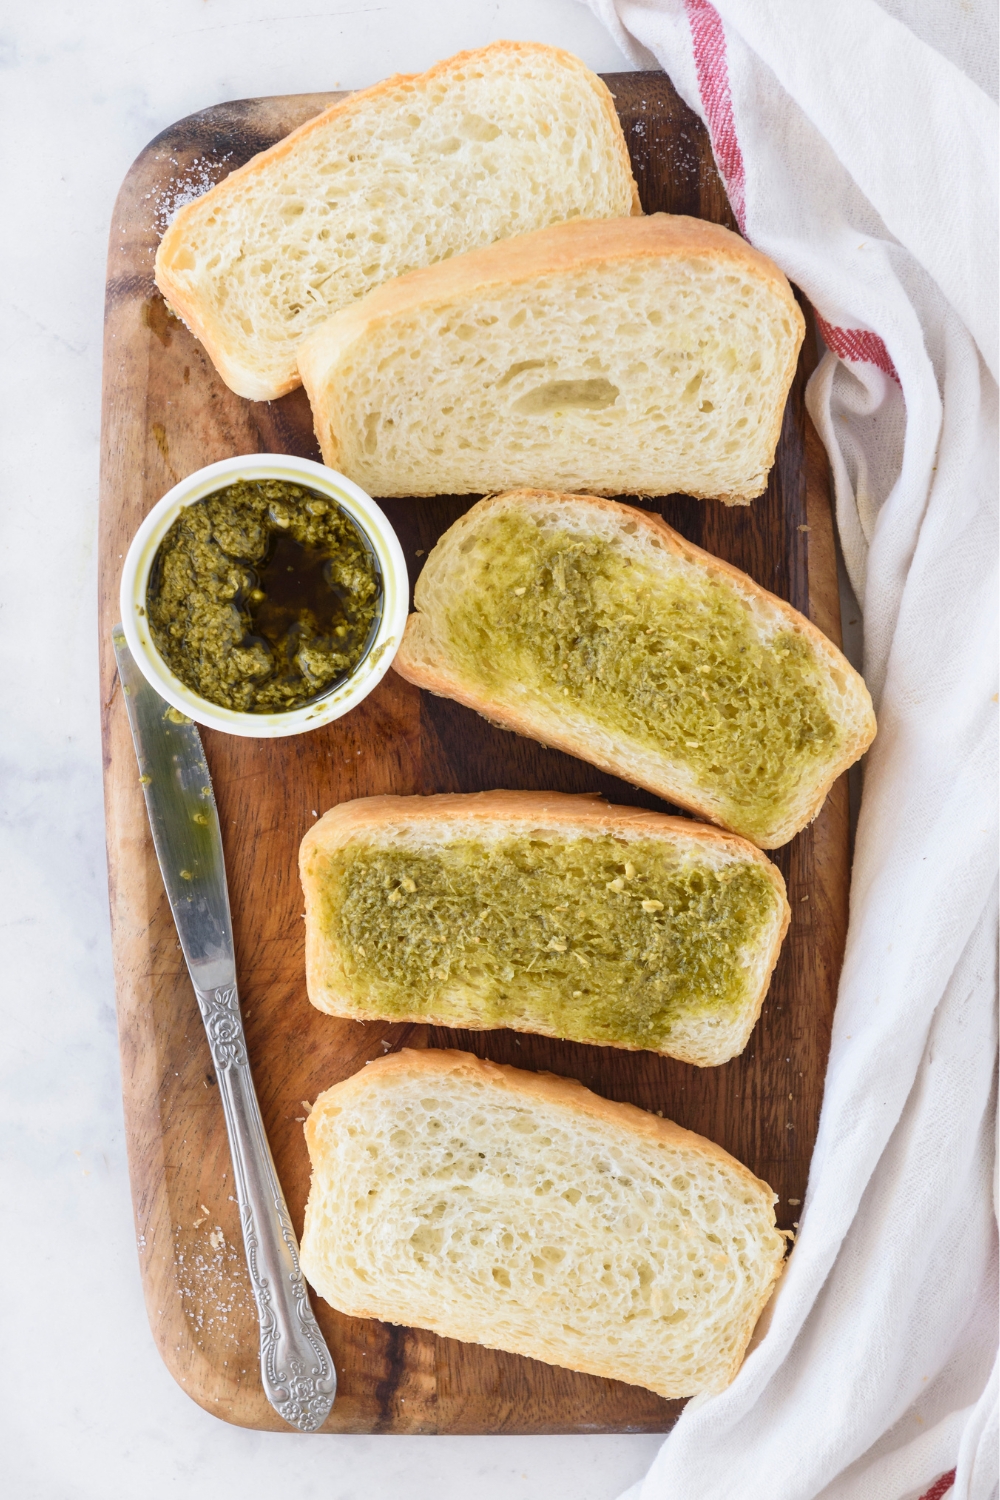 A wooden board with pesto and bread slices.